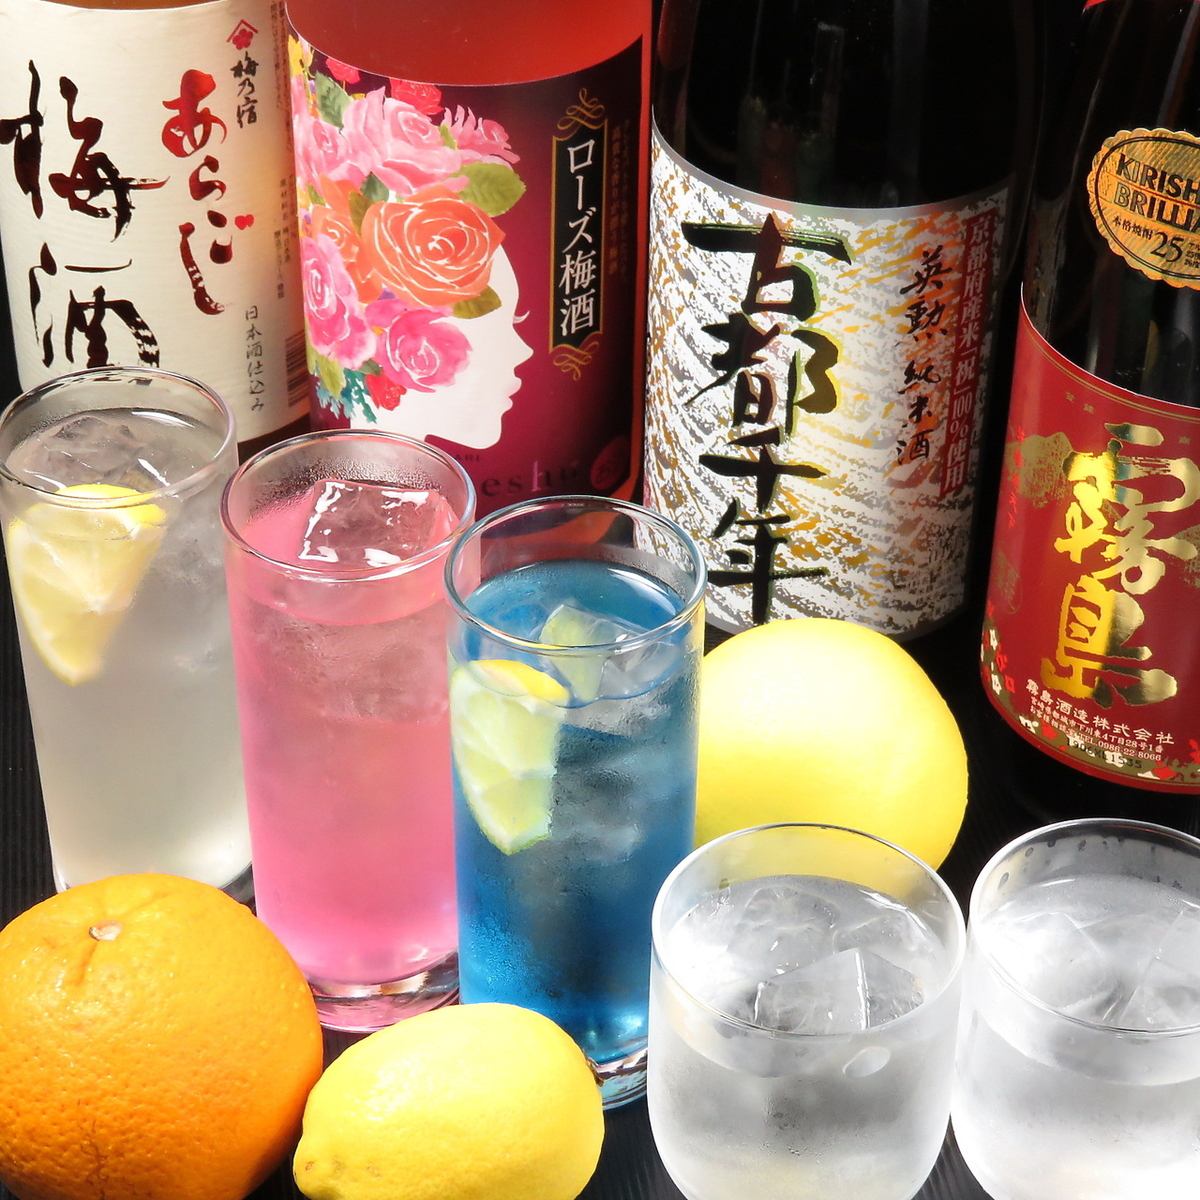 A wide variety of all-you-can-drink drinks for 2 hours for 1,500 yen ★ Draft beer is also available ★